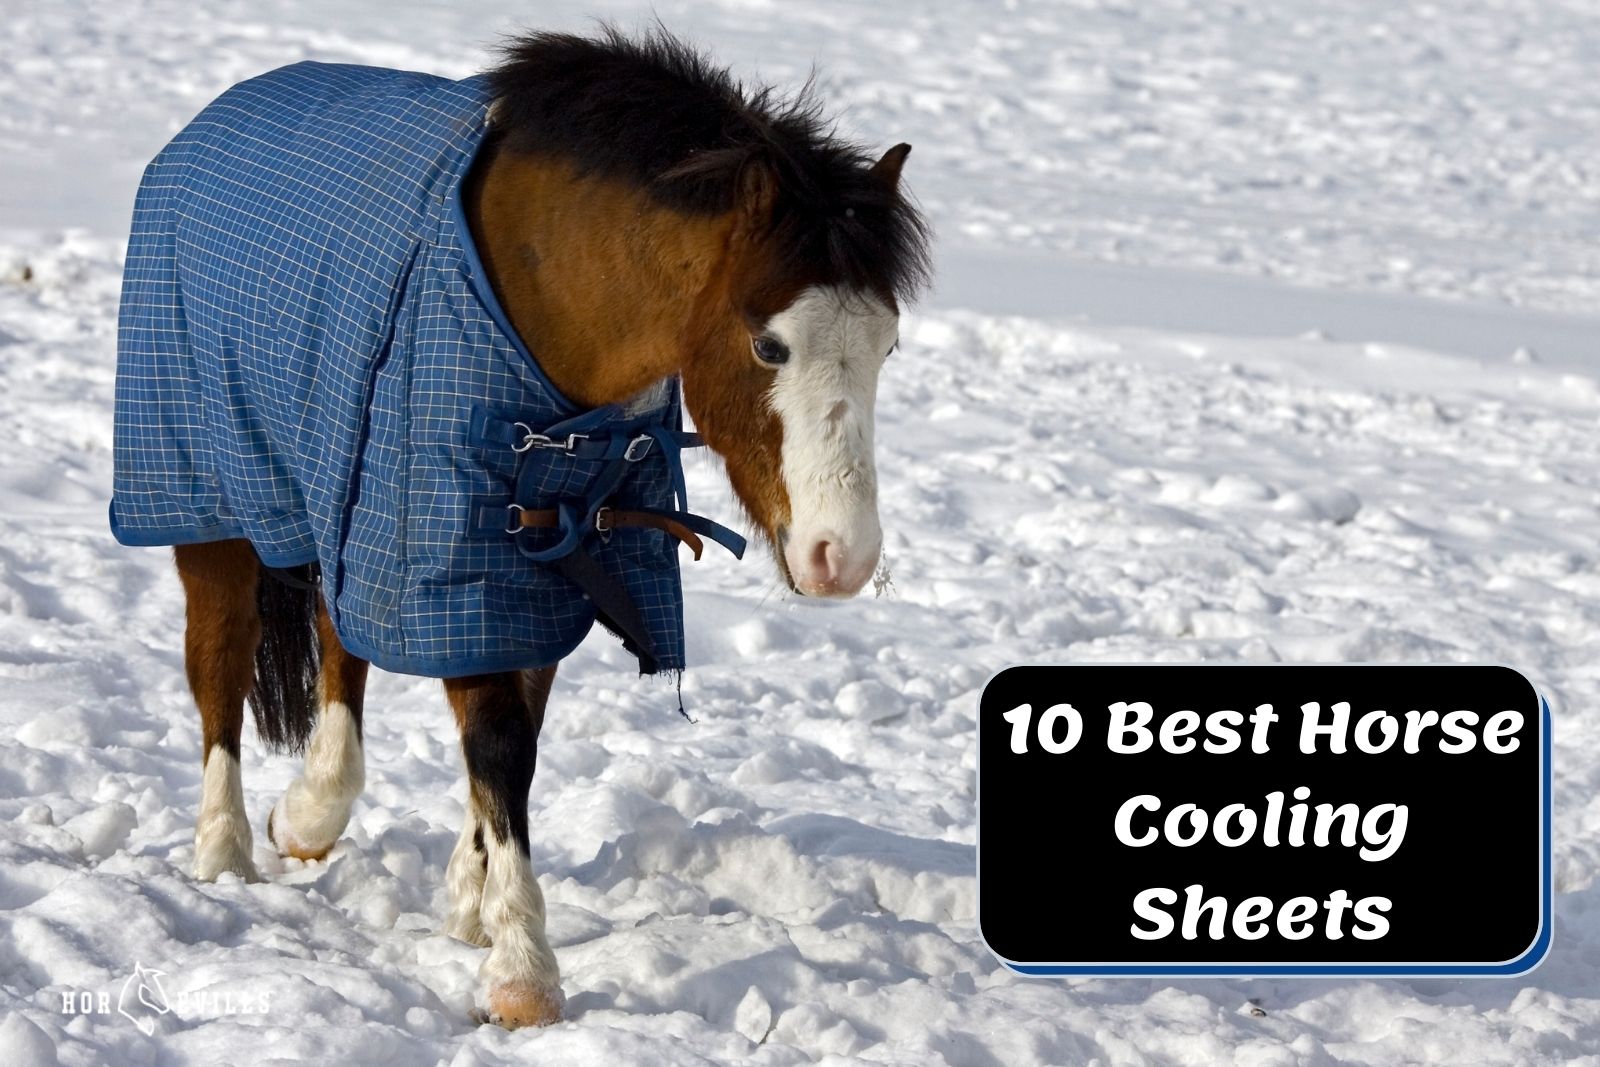 10 Best Horse Cooling Sheets to Keep Them Warm (2022 Reviews)